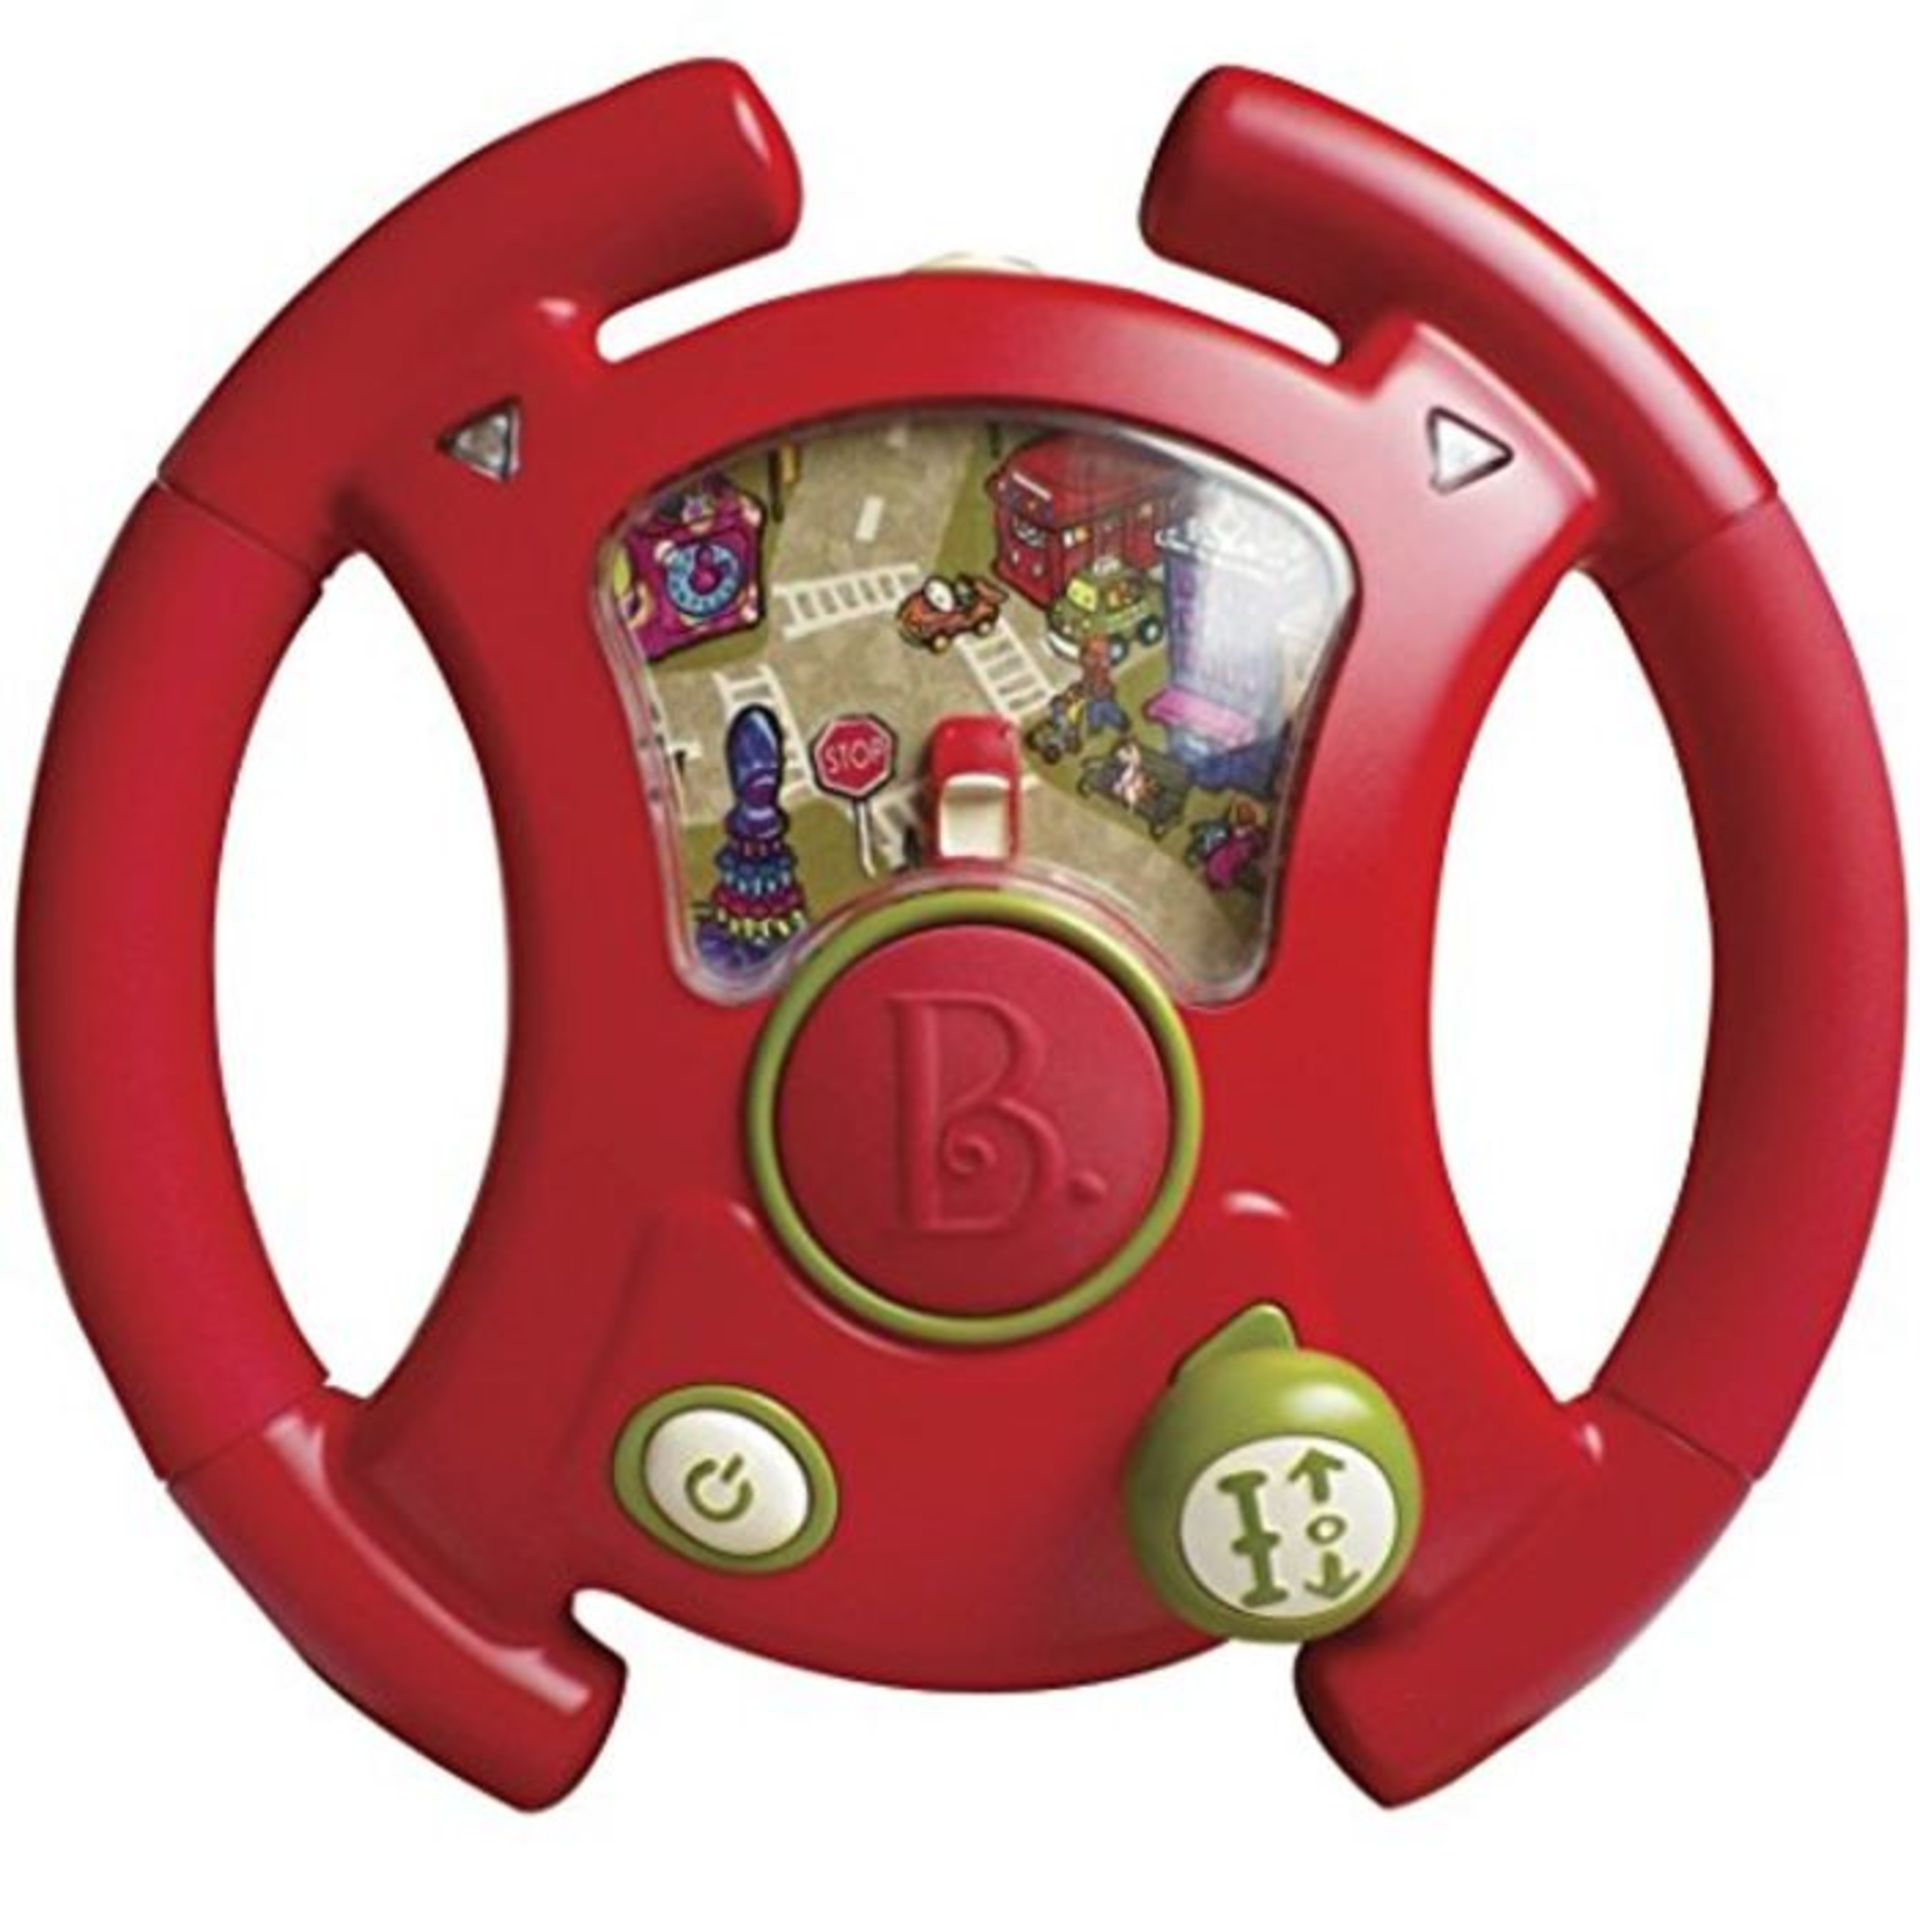 B. Toys by Battat BX1148Z YouTurns Steering Wheel-Interactive Driving Toy for Toddlers